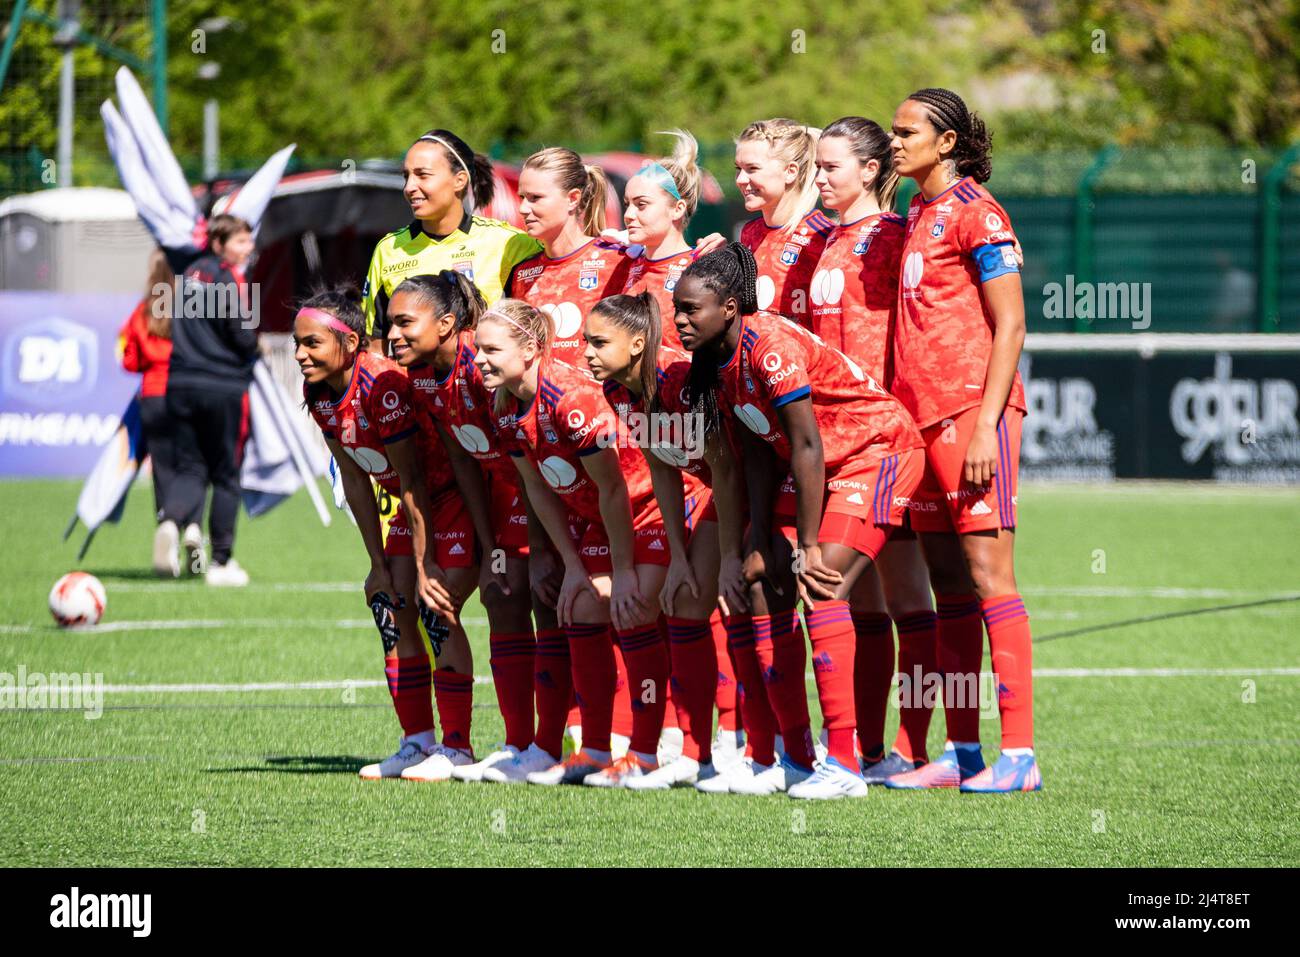 April 17, 2022, Fleury-Merogis, France: The players of Olympique Lyonnais  ahead of the Women&#39;s French championship, D1 Arkema football match  between FC Fleury 91 and Olympique Lyonnais (Lyon) on April 17, 2022